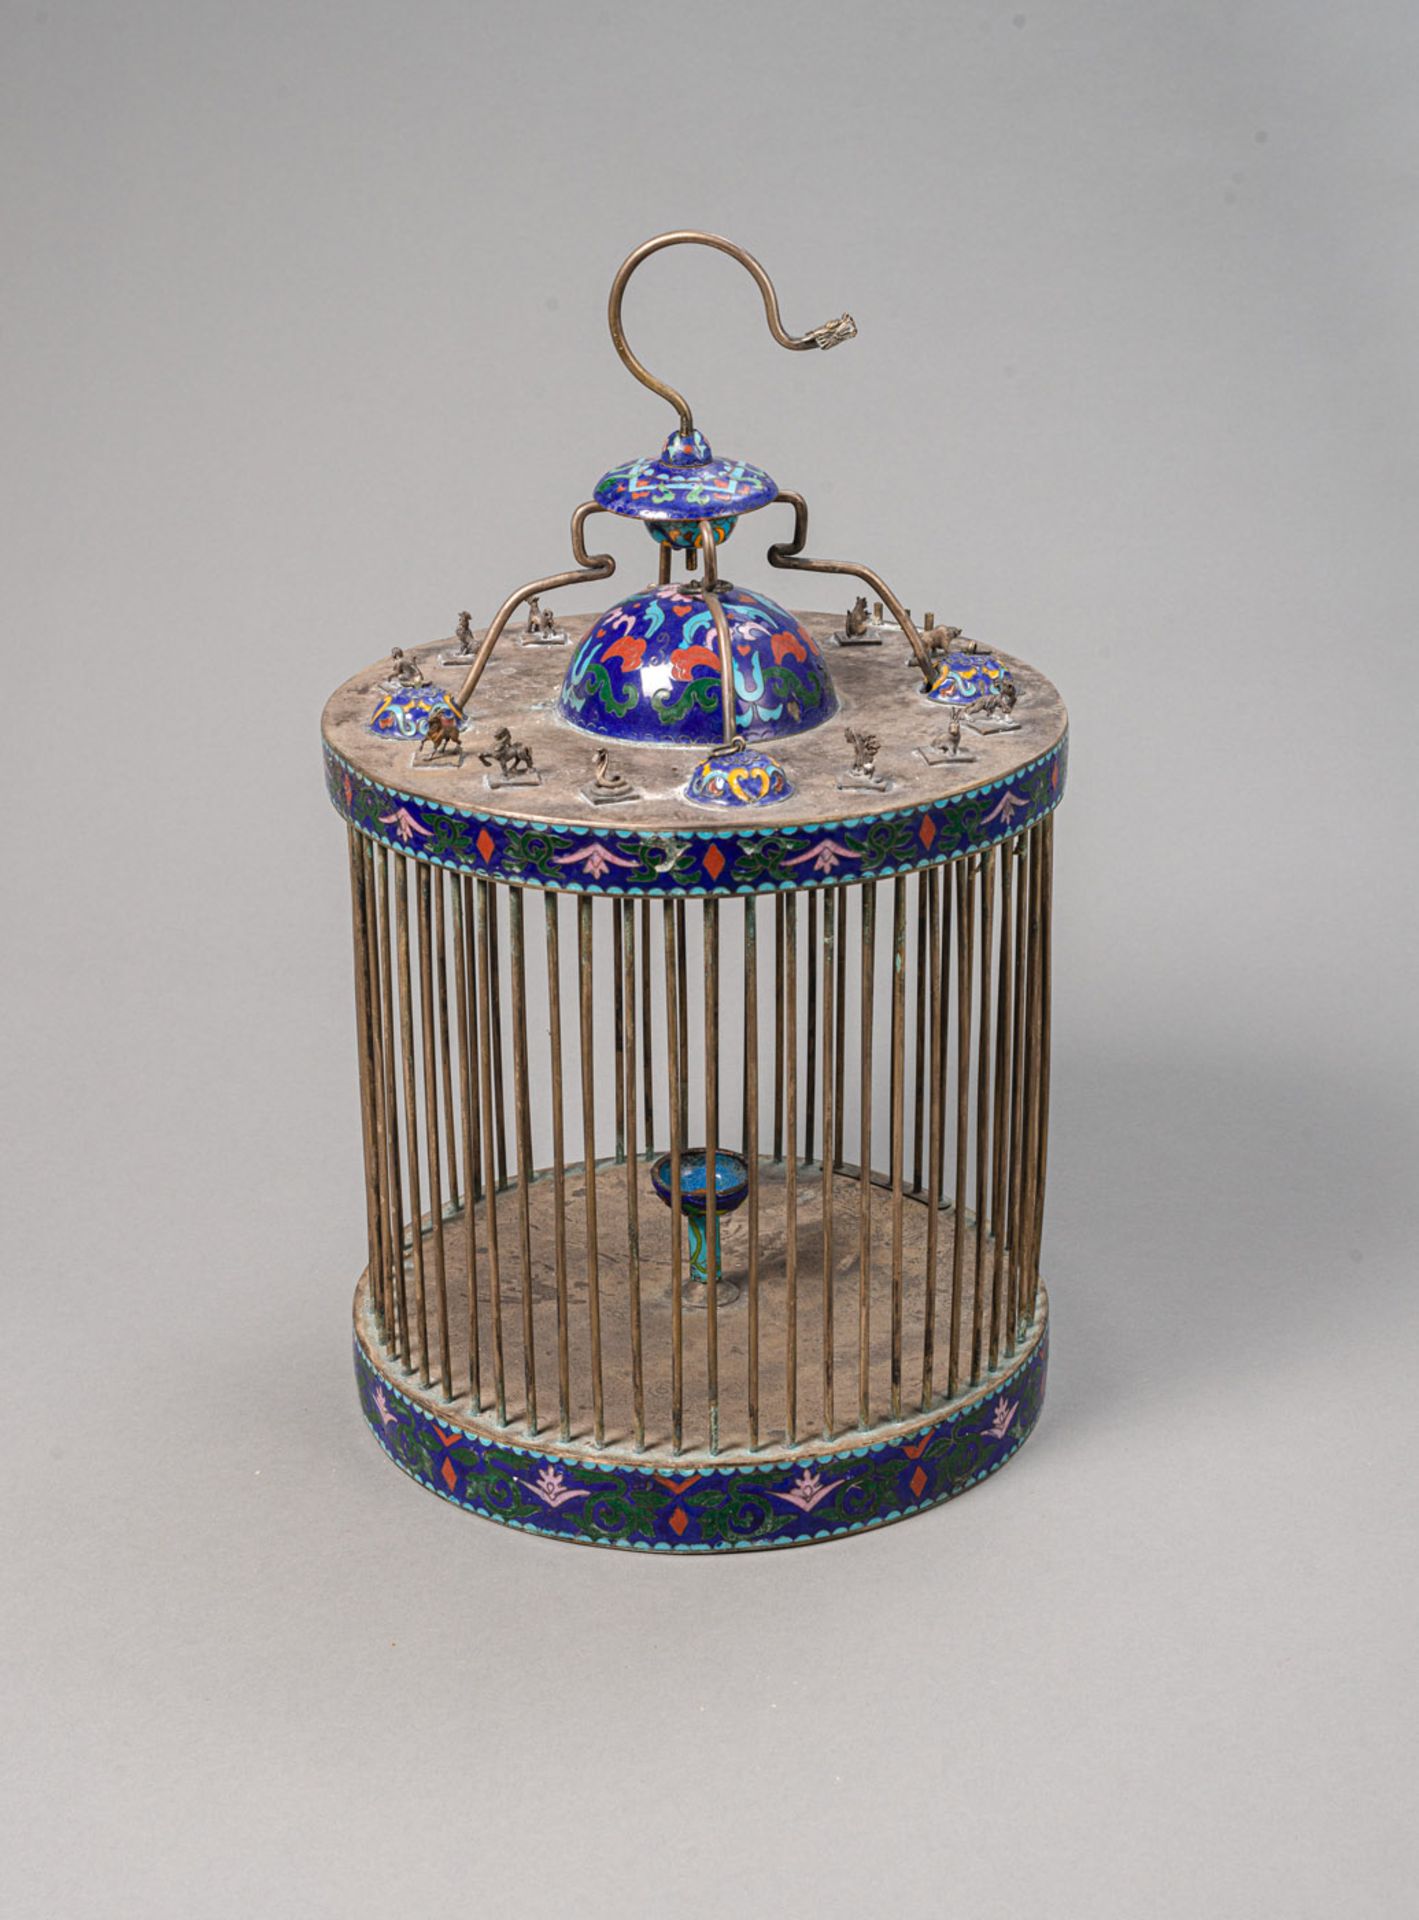 A SILVERED ENAMEL-DECORATED BIRD CAGE - Image 2 of 4